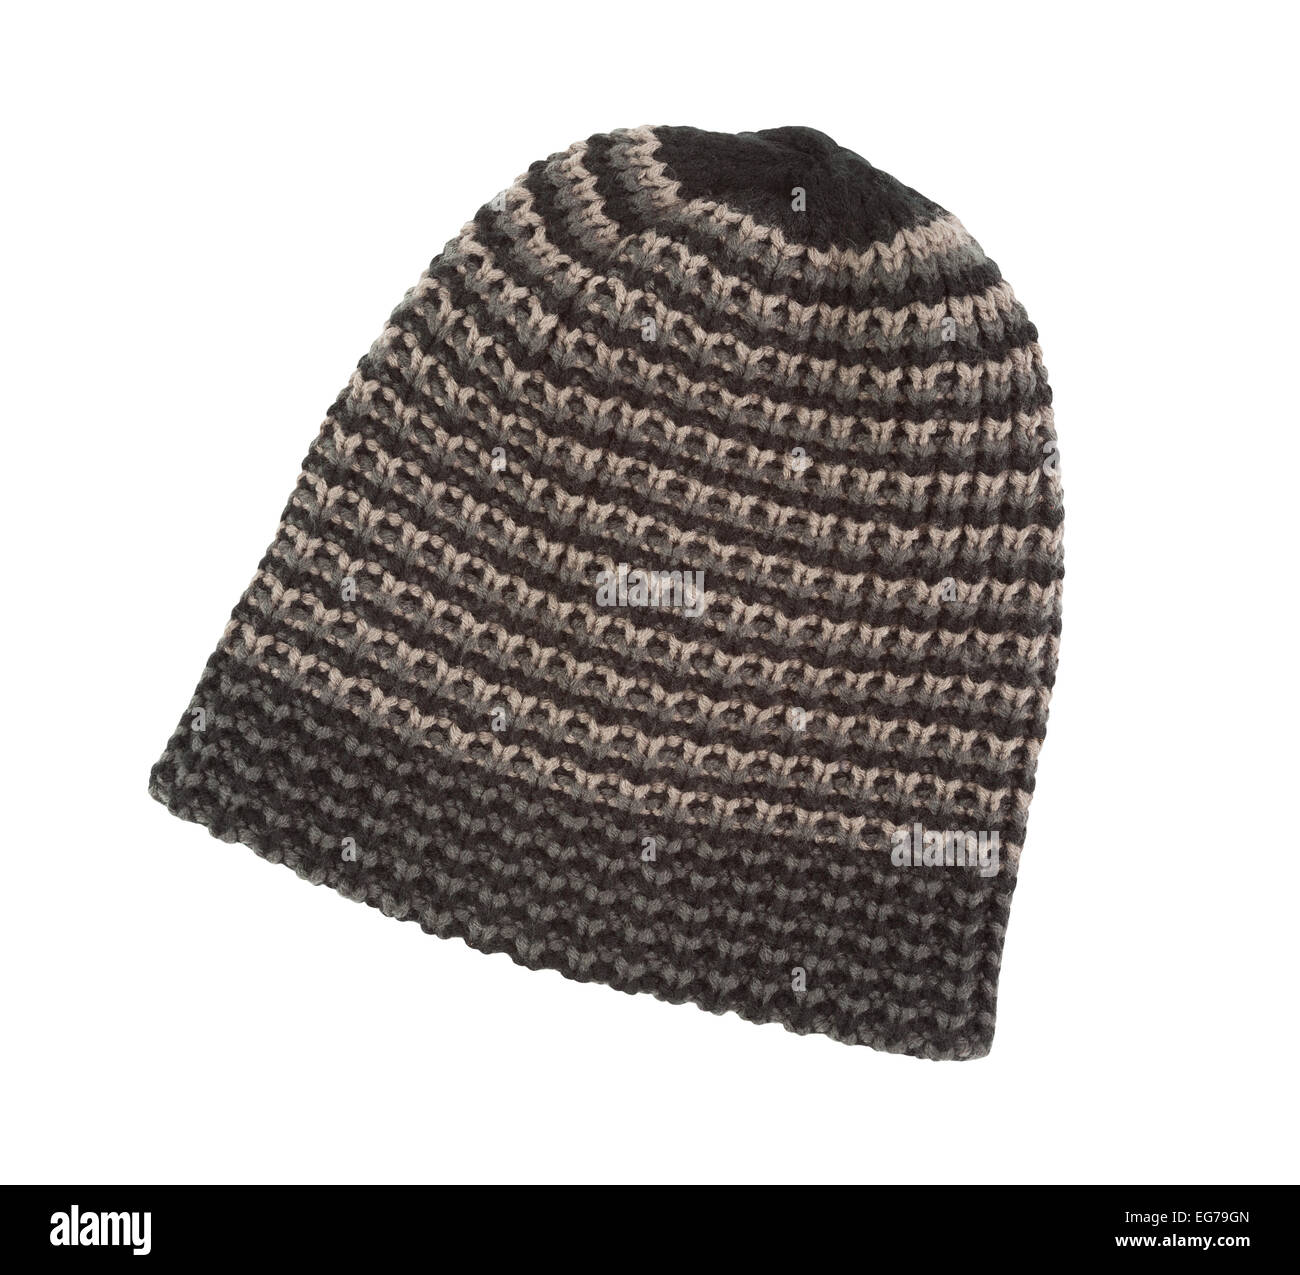 Beanie Hat isolated Banque D'Images